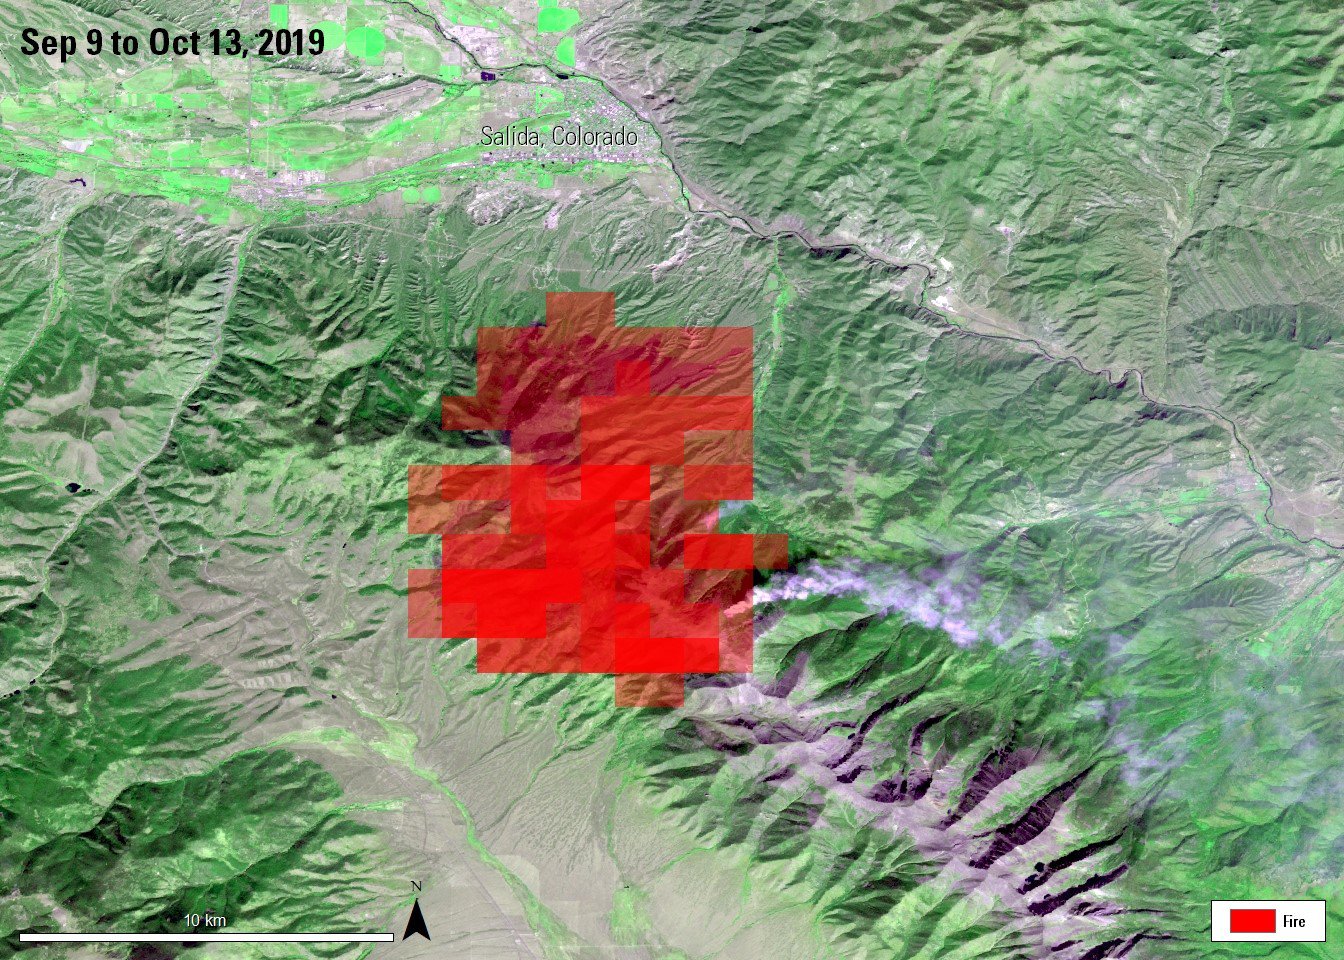 VNP14 products from Sep 9 to Oct 13, 2019 overlaid on AST_L1T image of Decker Fire near Salida, Colorado, acquired on October 12, 2019.